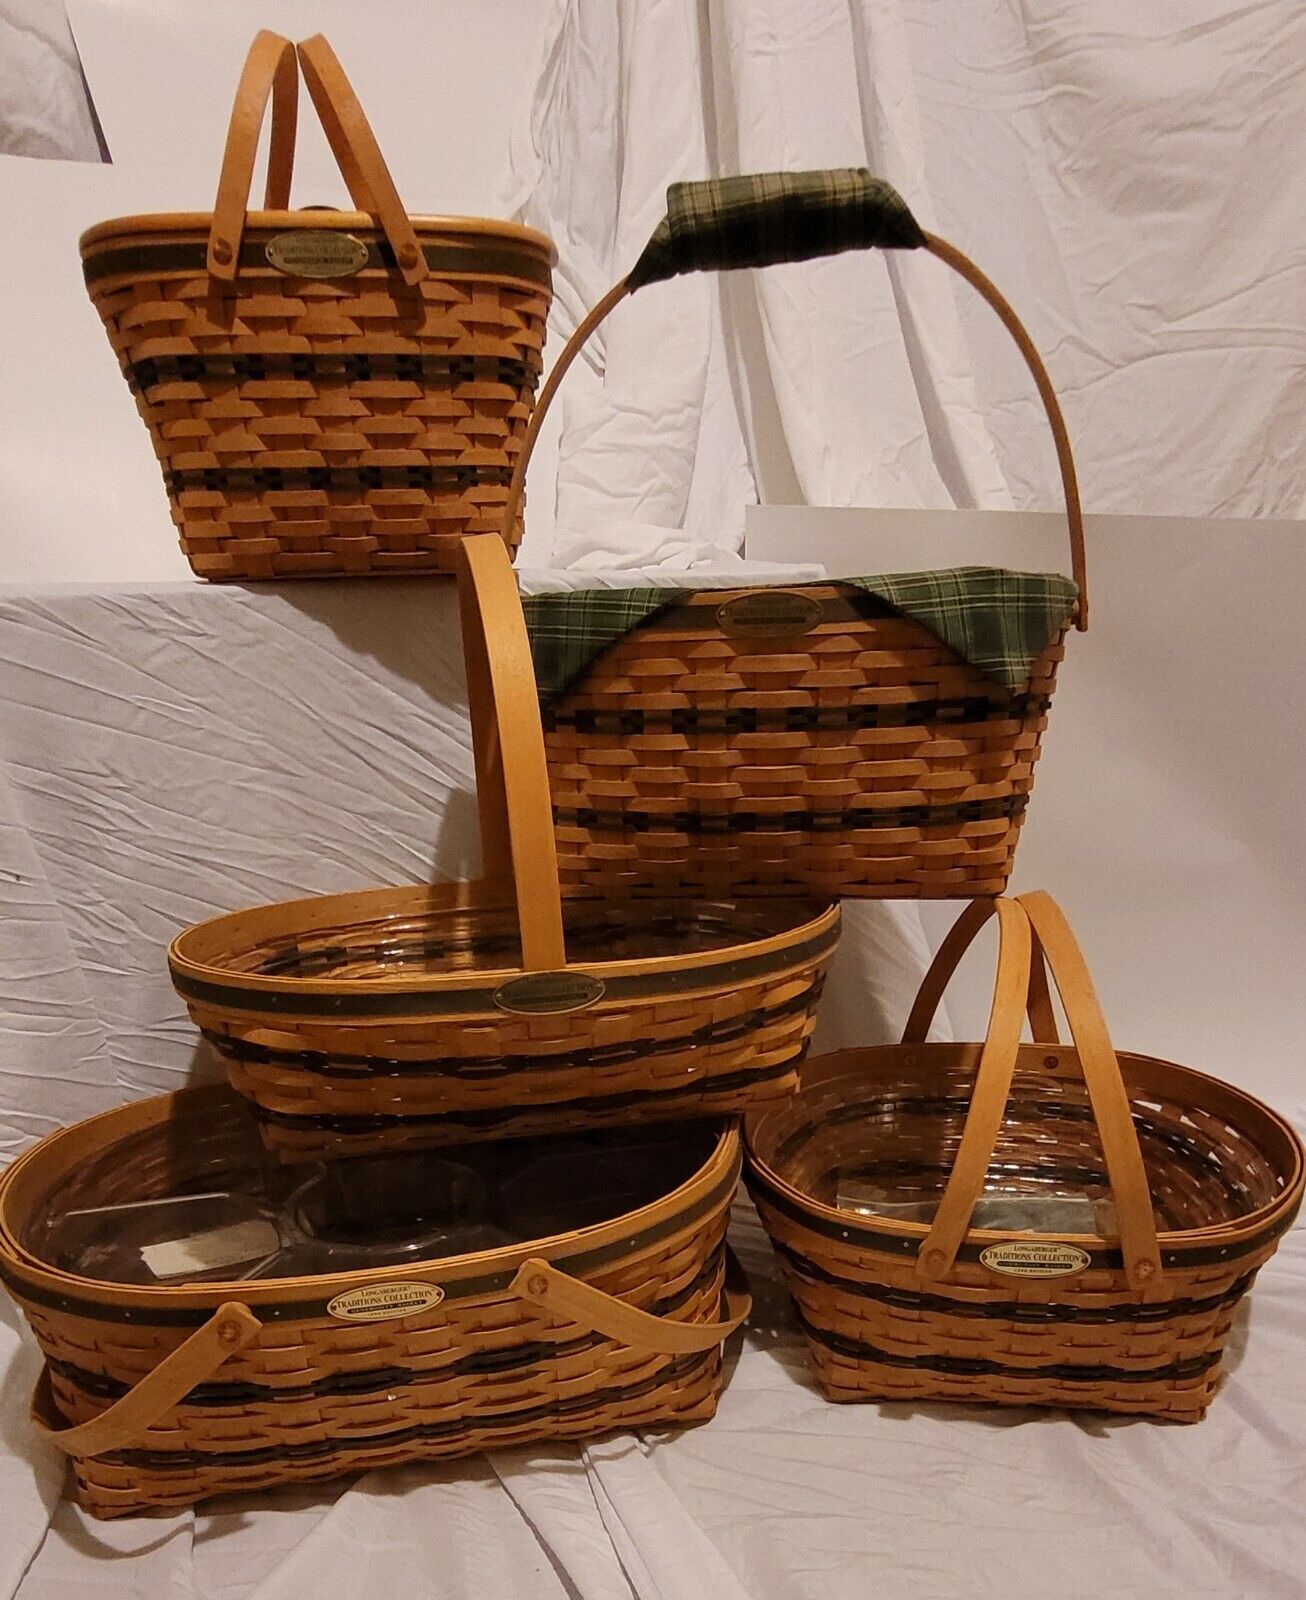 NOS Longaberger Basket Family Traditions Series Complete Set of 5 Baskets Rare 